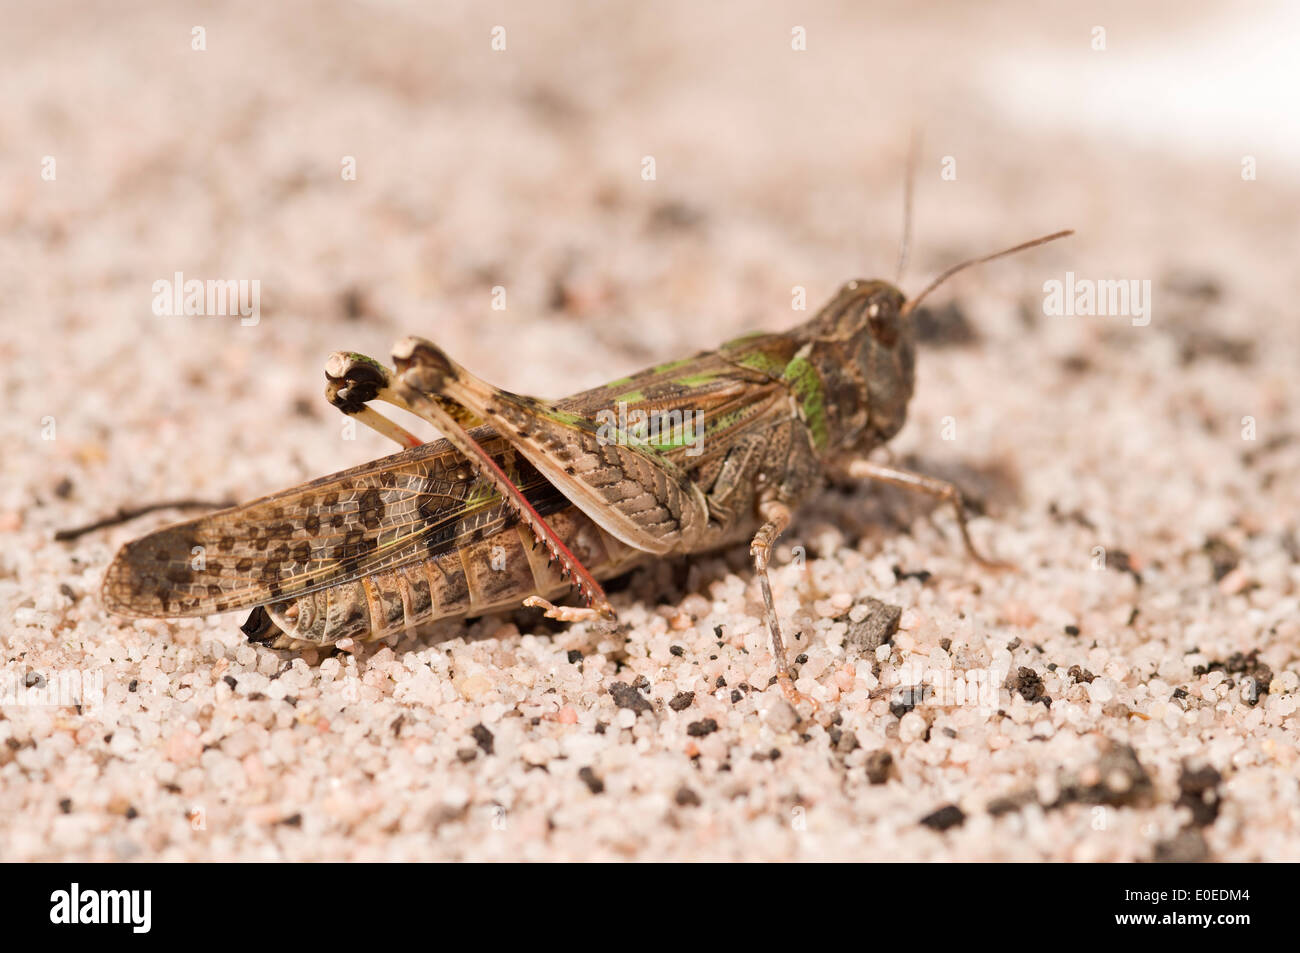 The Australian plague locust is one of the most destructive native insect pests of Australia. Stock Photo